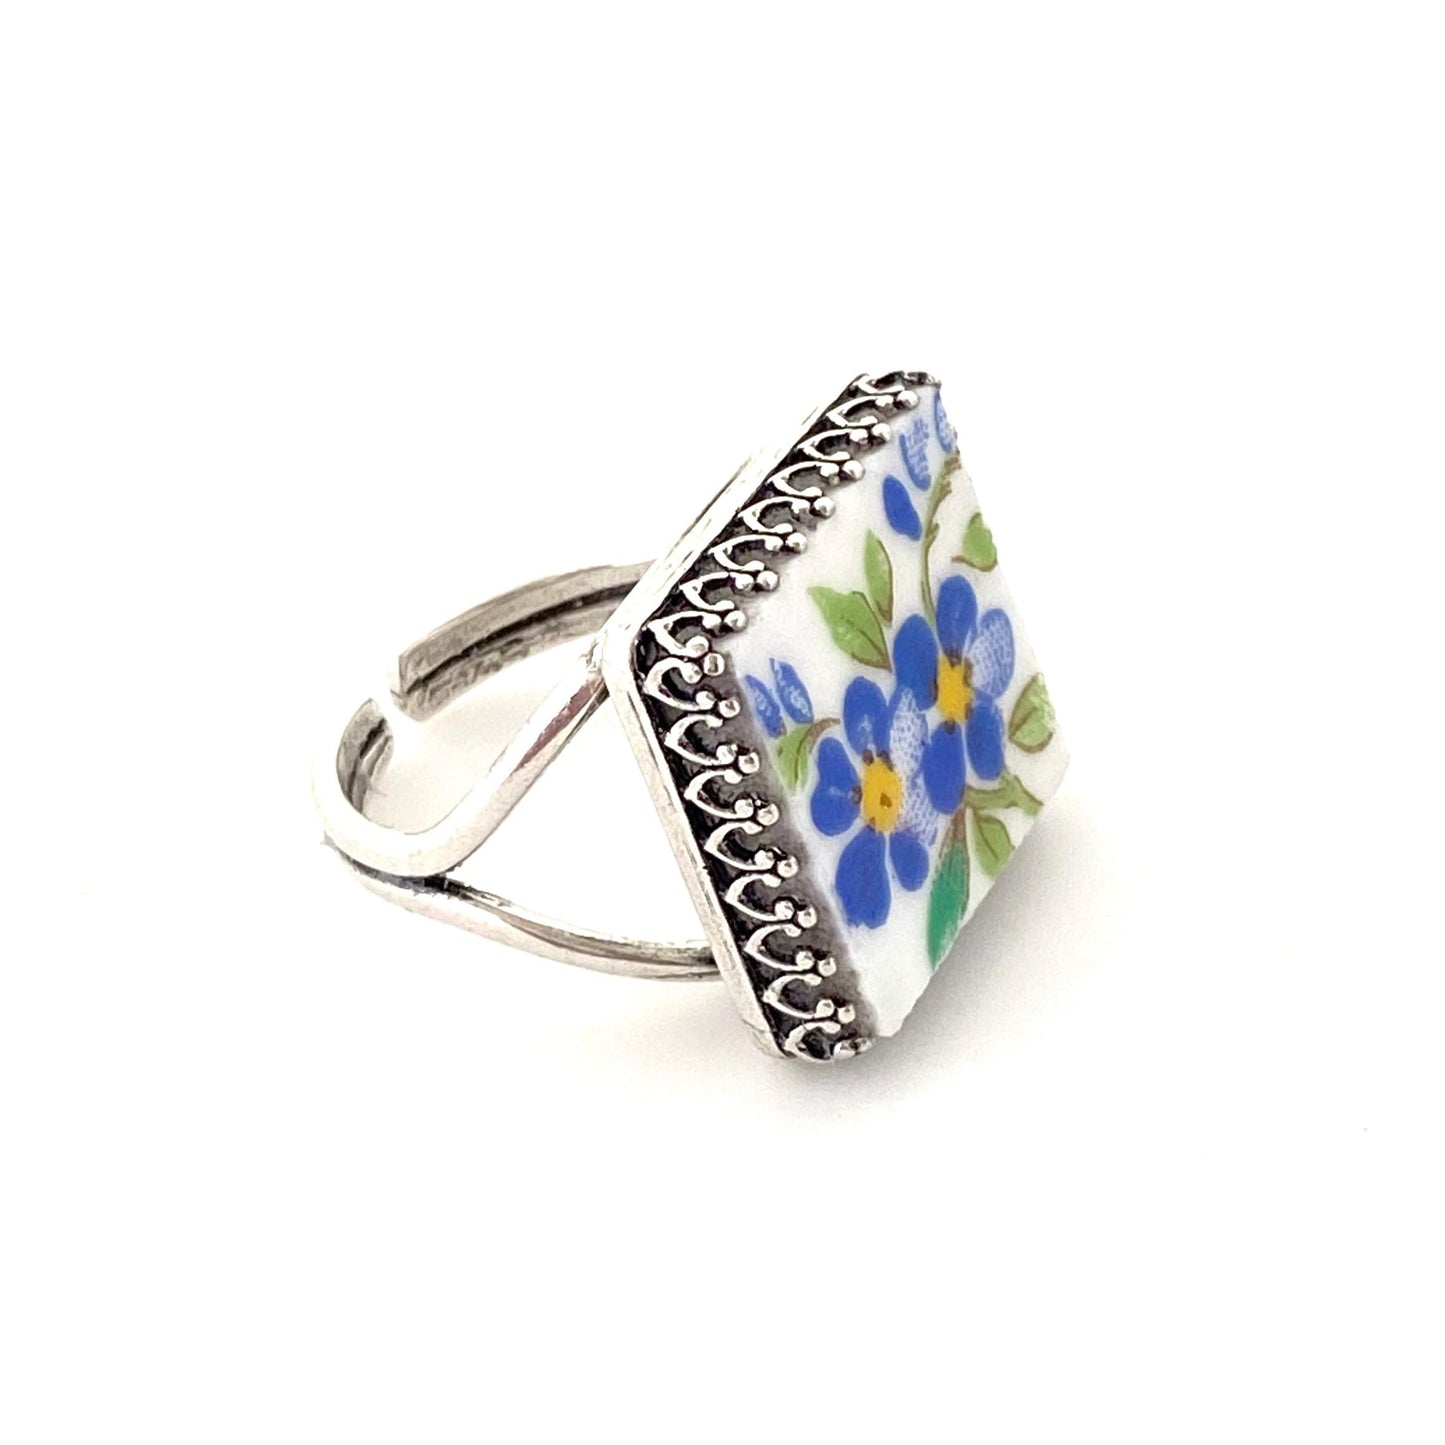 Forget Me Not Ring, Sterling Silver Rings for Women, Broken China Jewelry, Birthday Gift for Wife